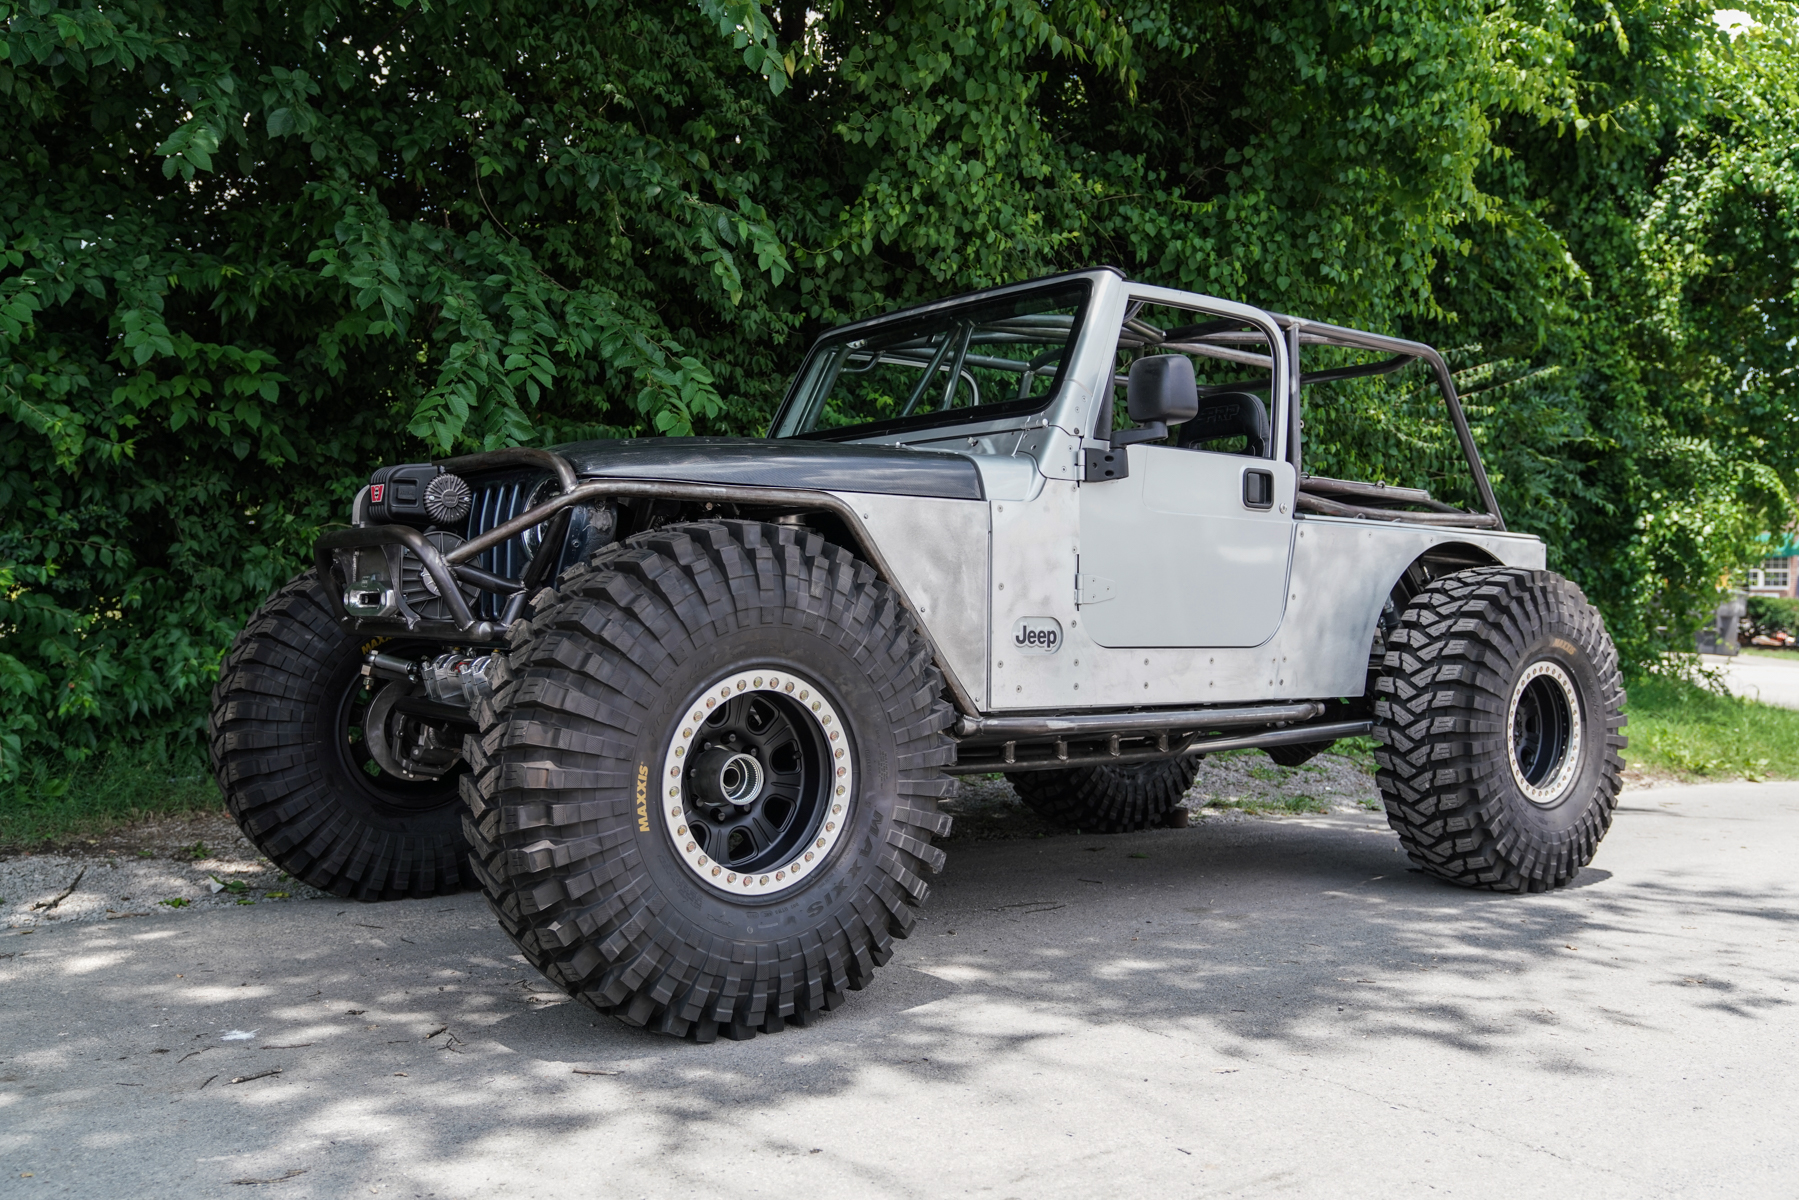 Troy's Jeep LJ Tube Chassis Buggy